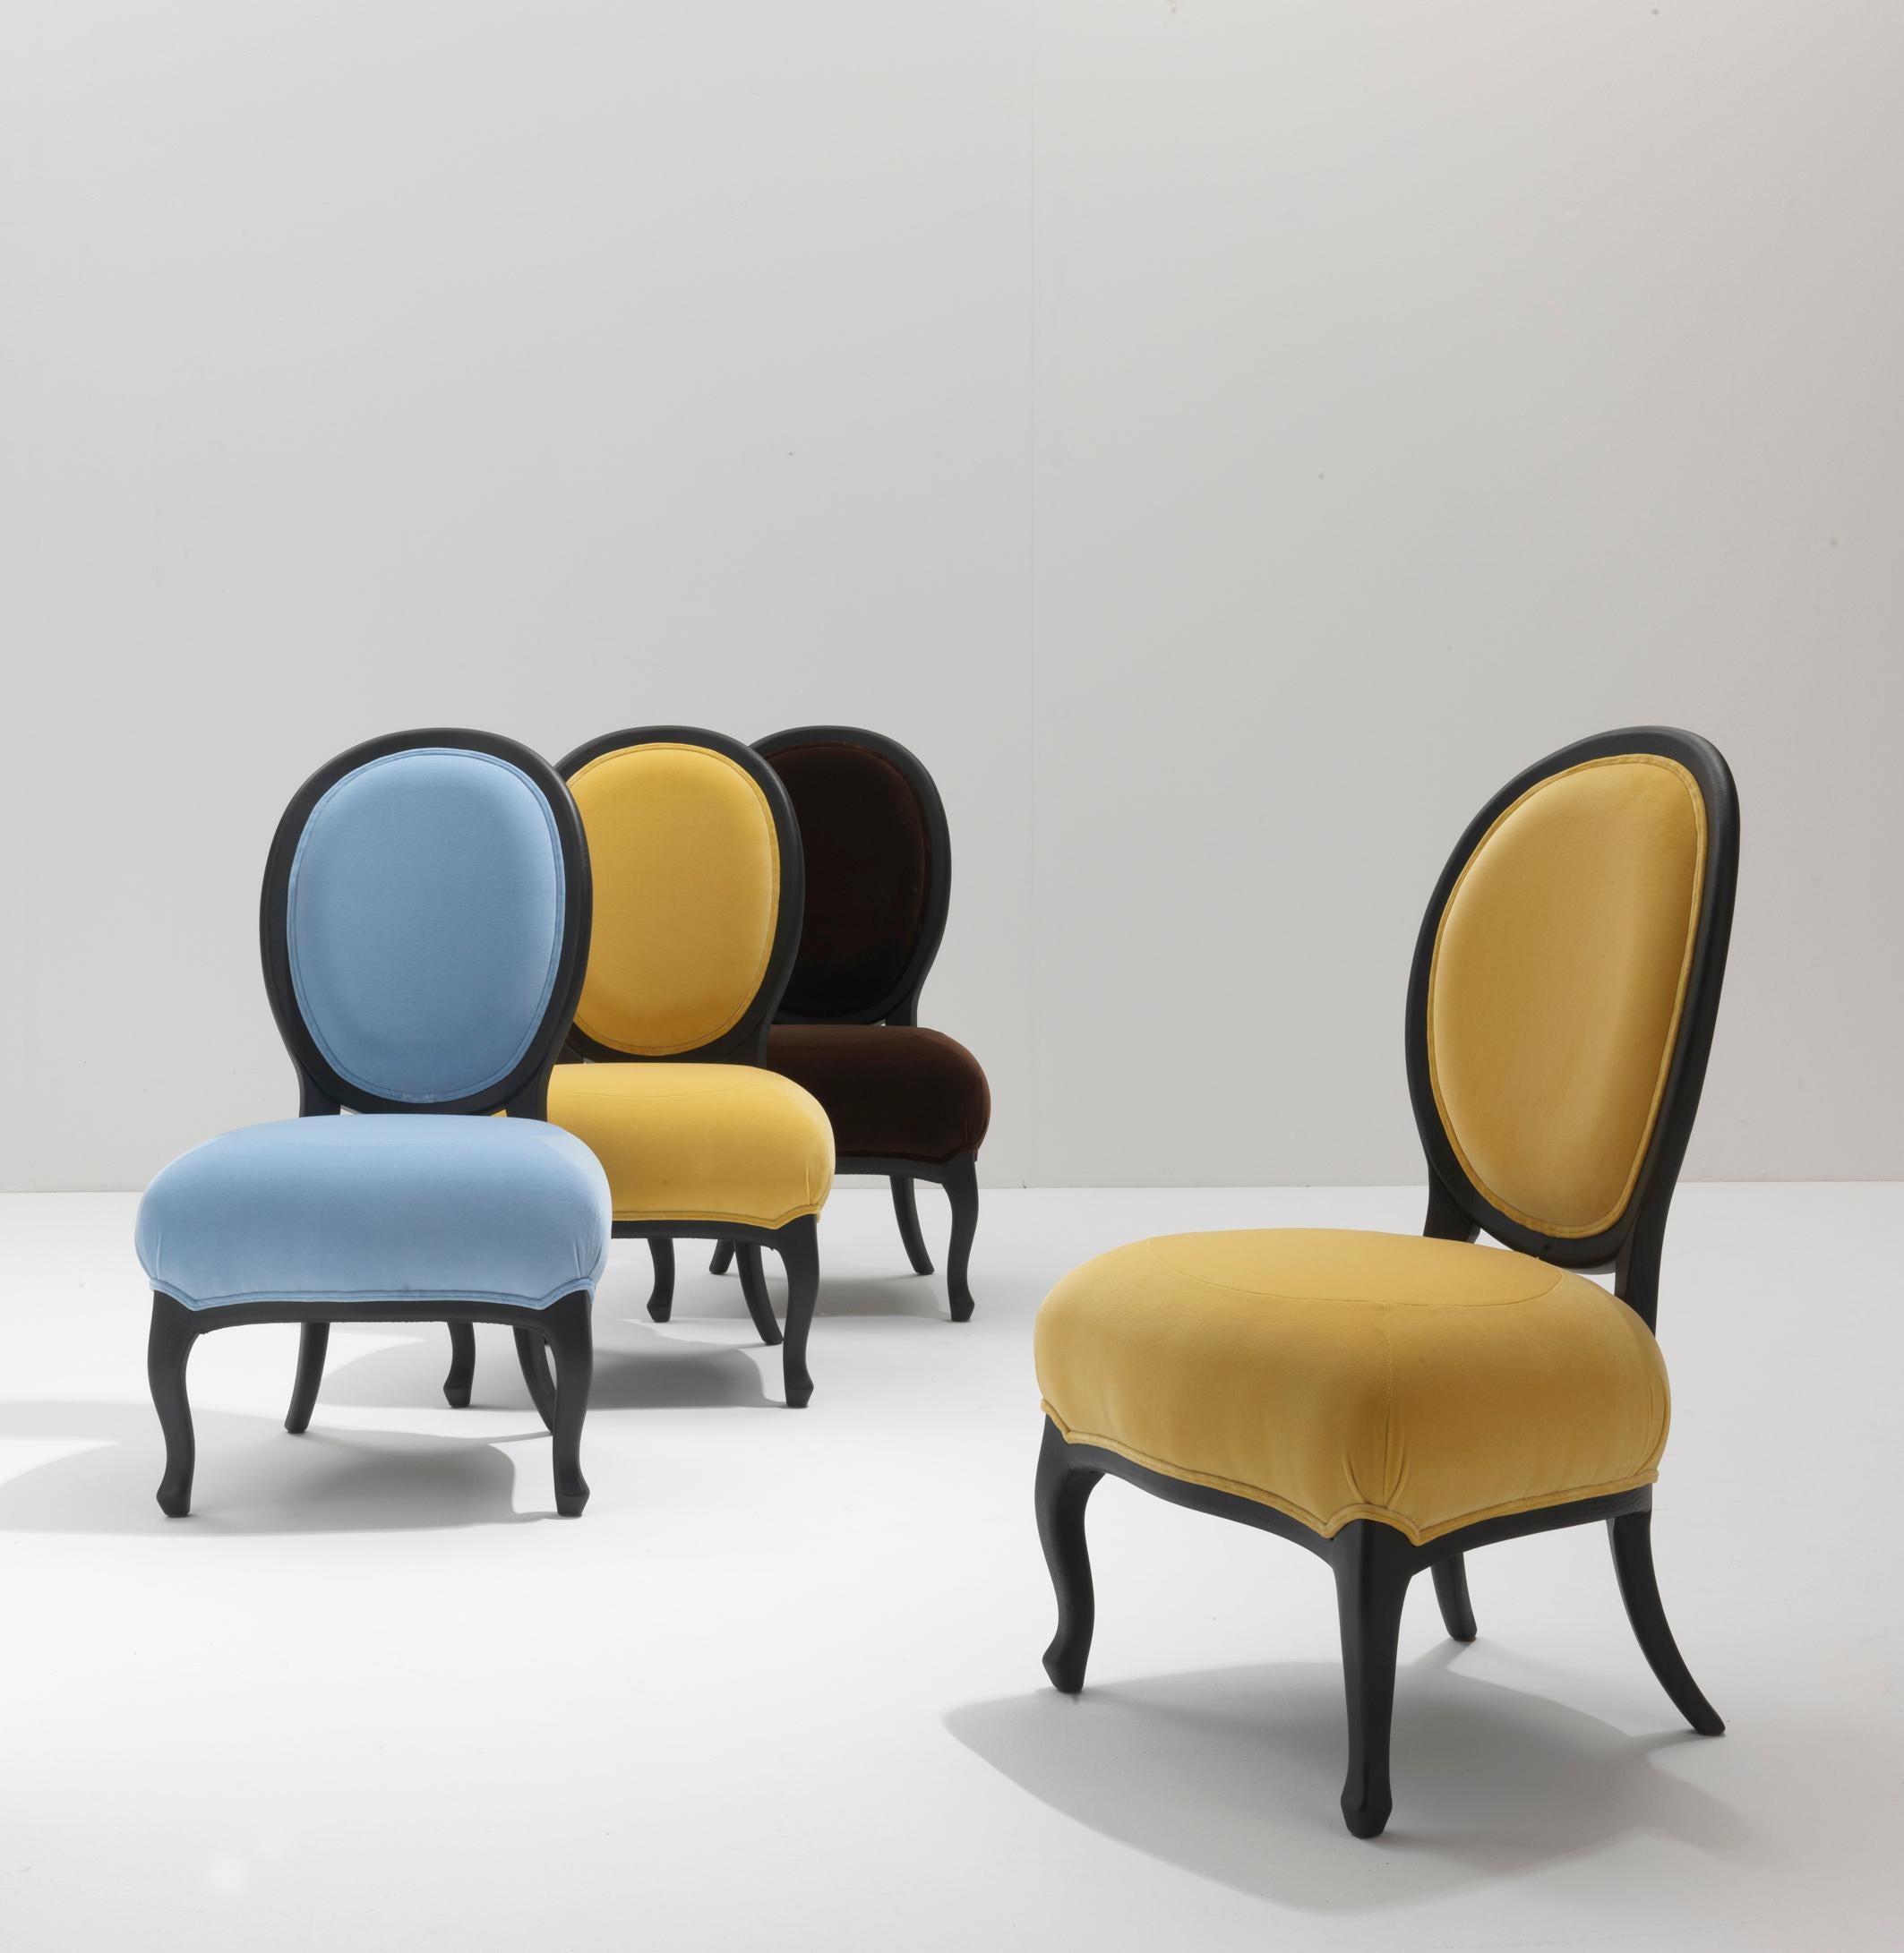 A perfect chair to accompany dining tables and writing desks is Rubens, product designed by Nigel Coates.

Inspired by the classic living room armchair, Rubens becomes a contemporary object thanks to its matt walnut finishes and the iridescent